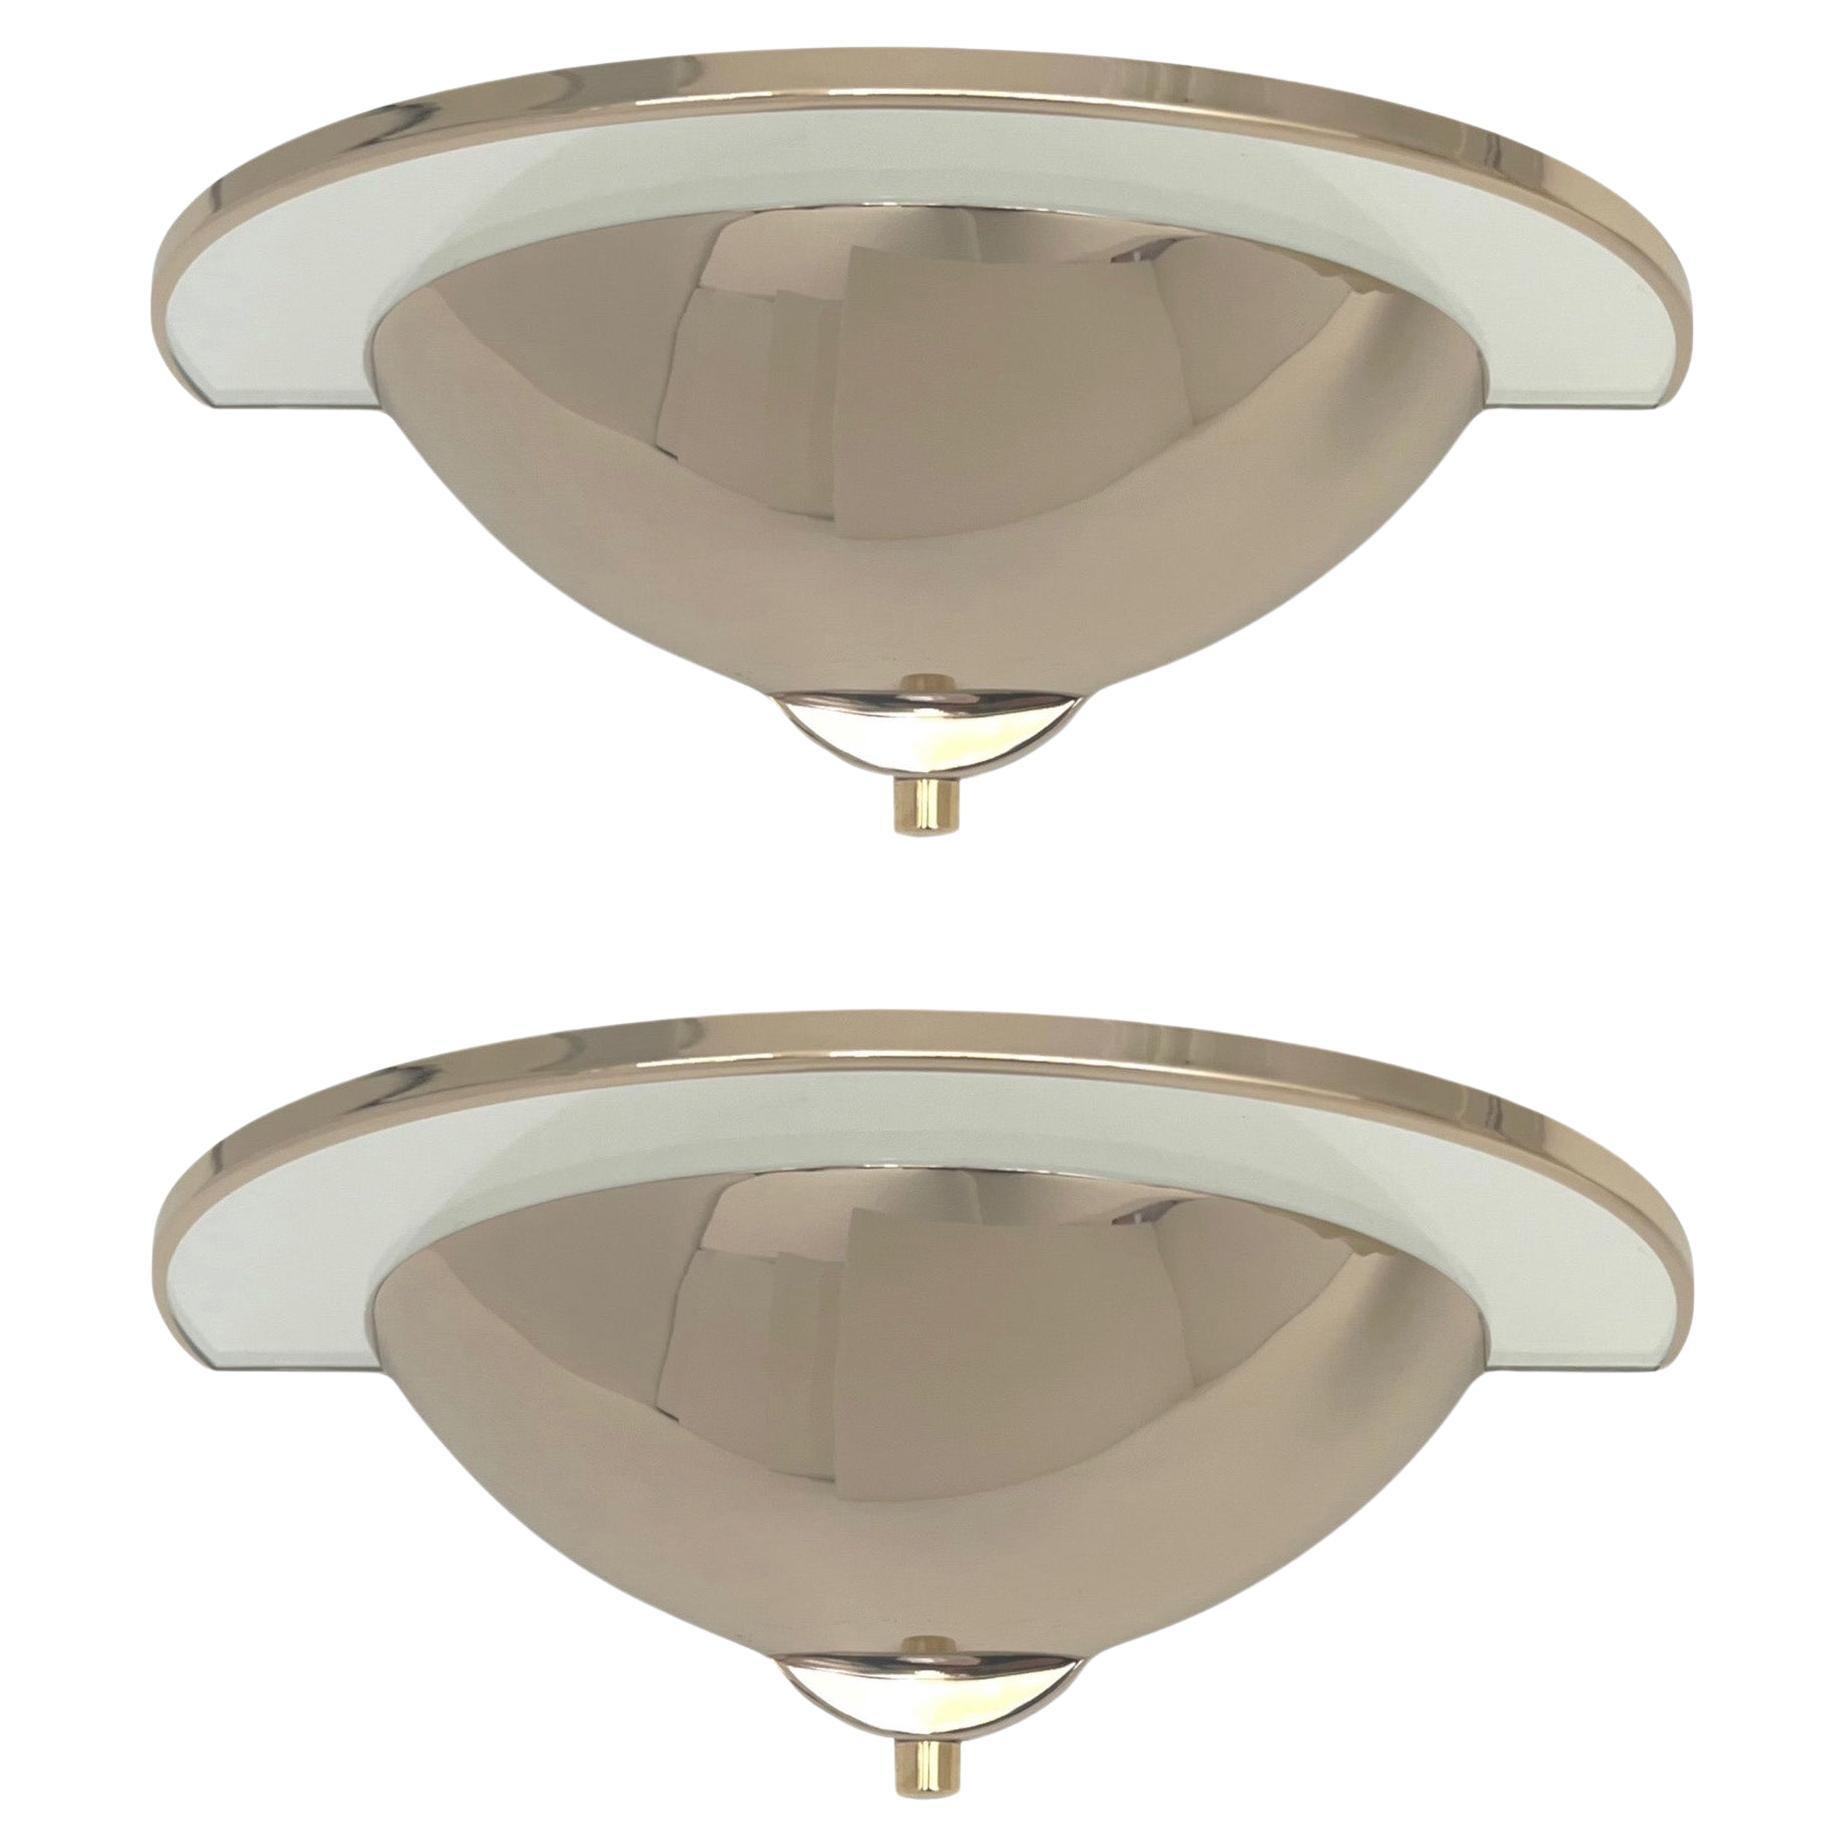 Postmodern Dimmable Gold Pair of Wall Sconces by Estiluz, Barcelona, 1980s For Sale